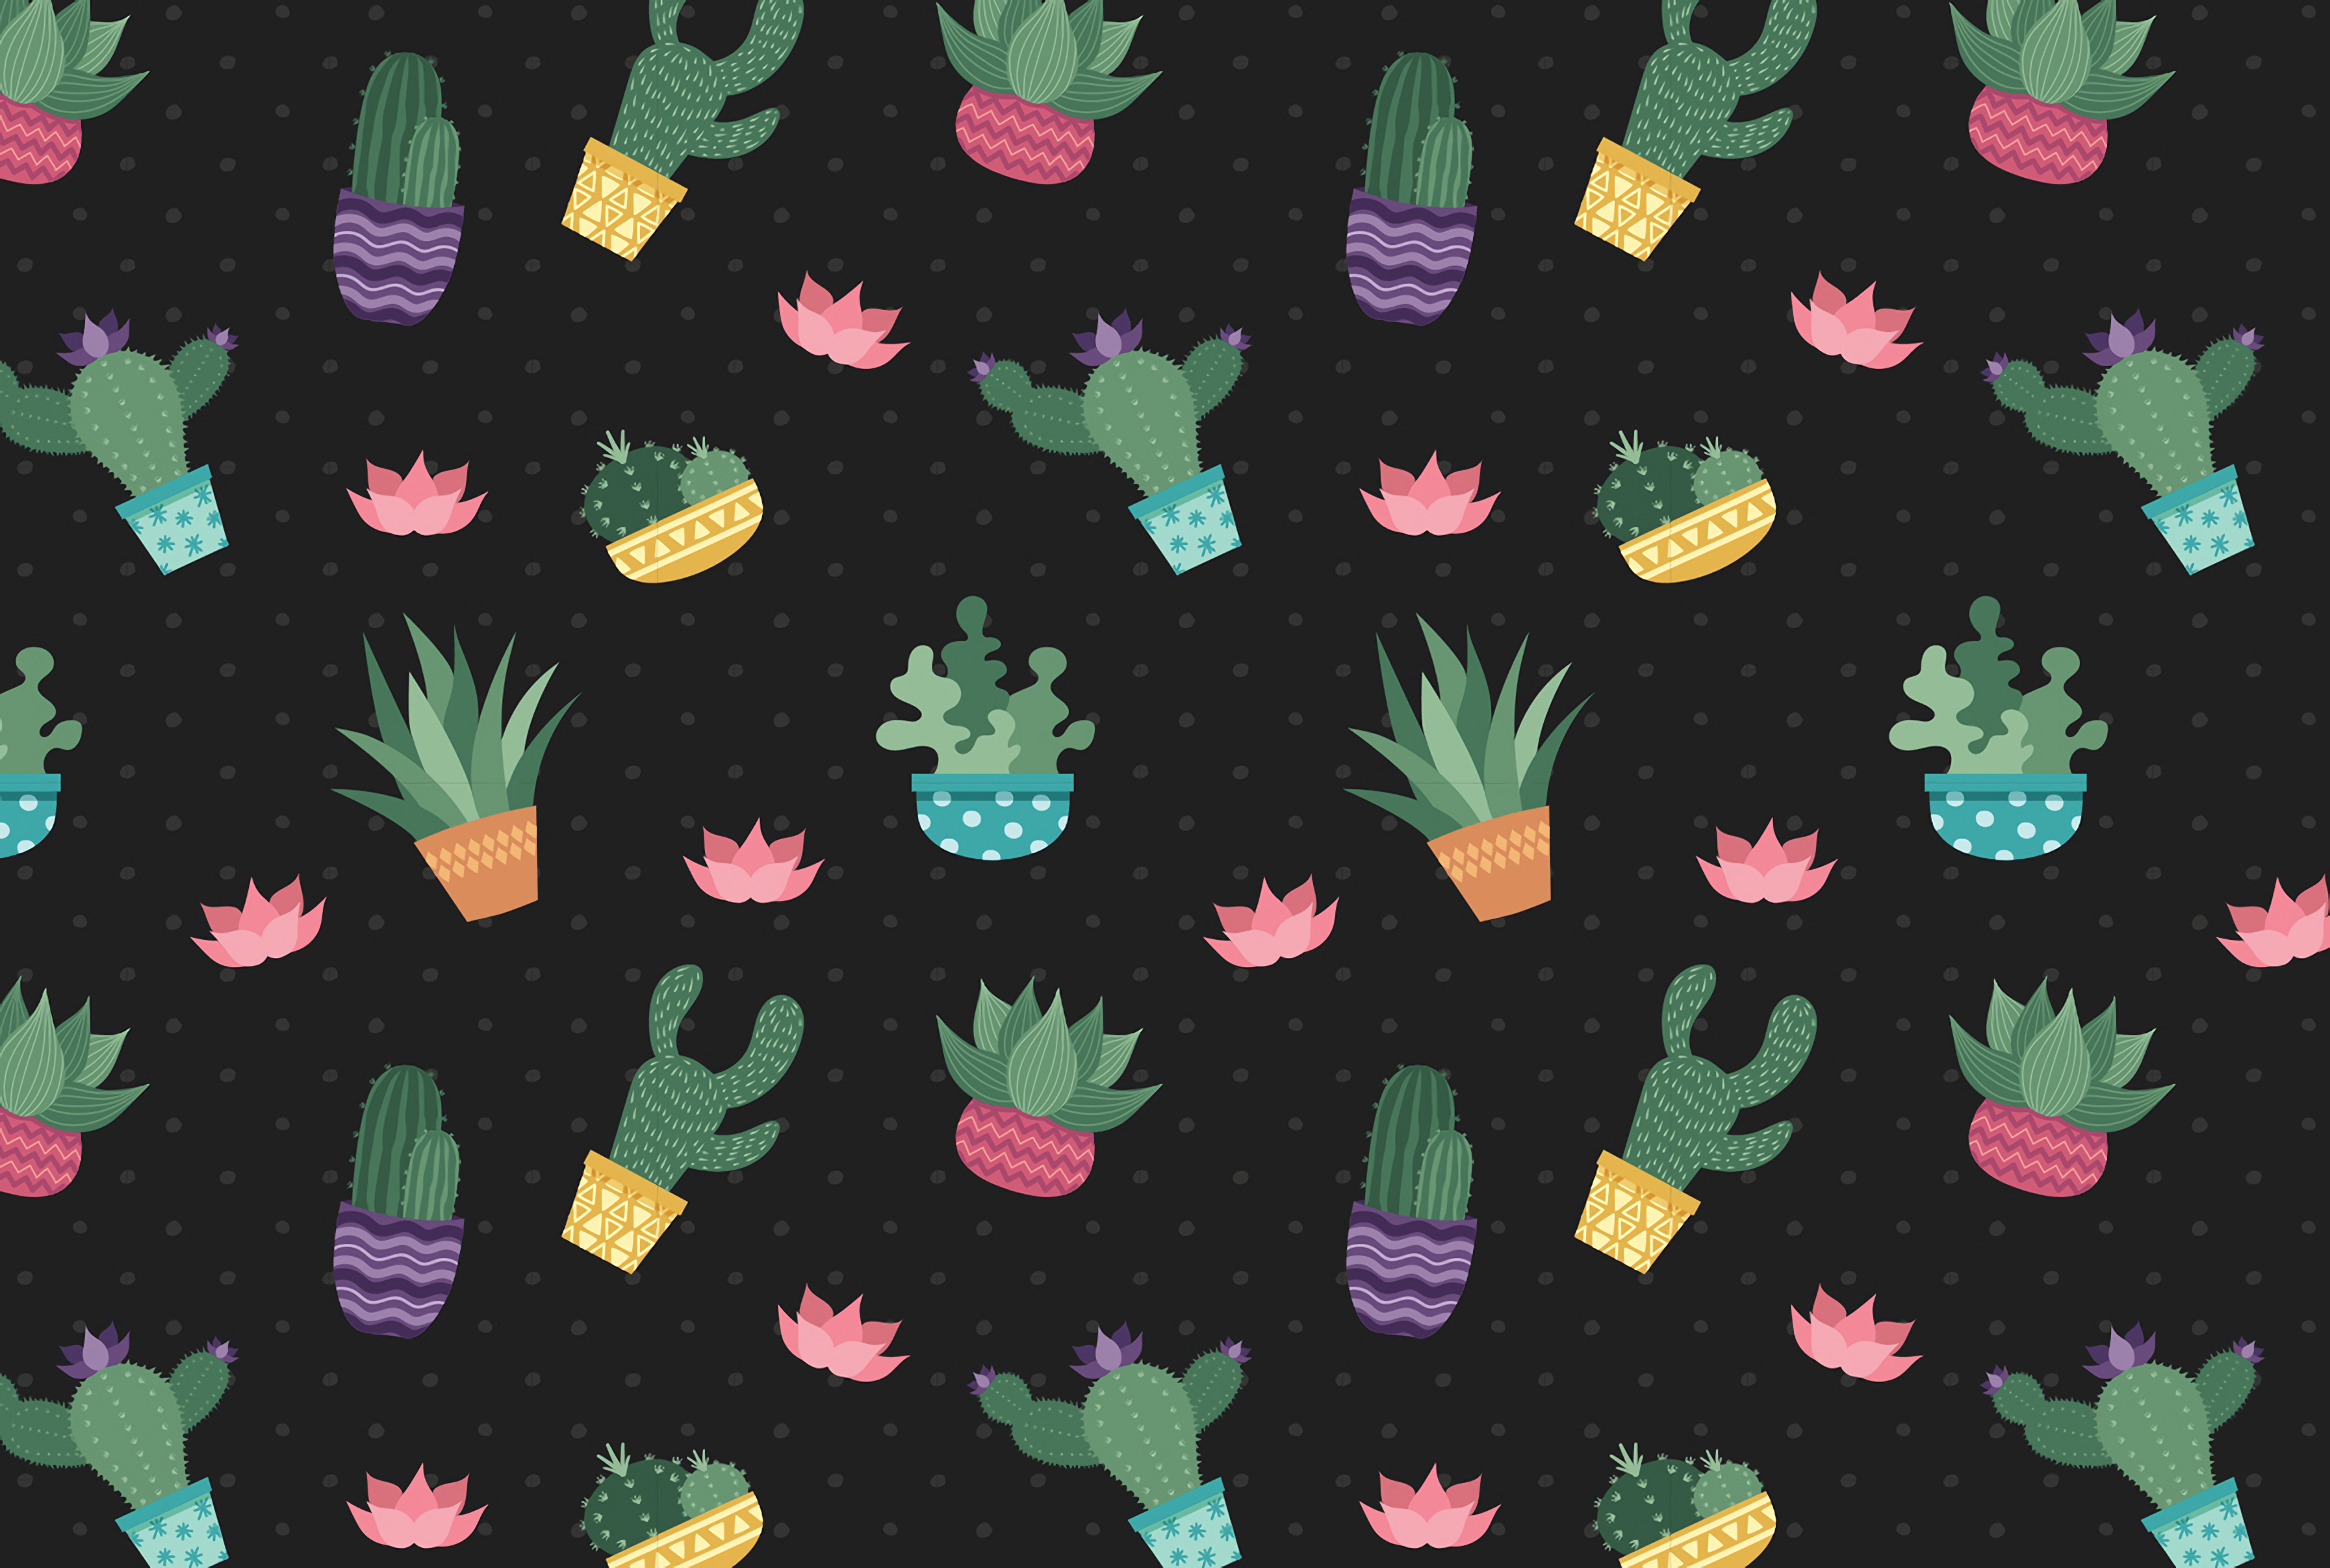 wallpapers texture, art, textures, pattern, cactuses, flowers